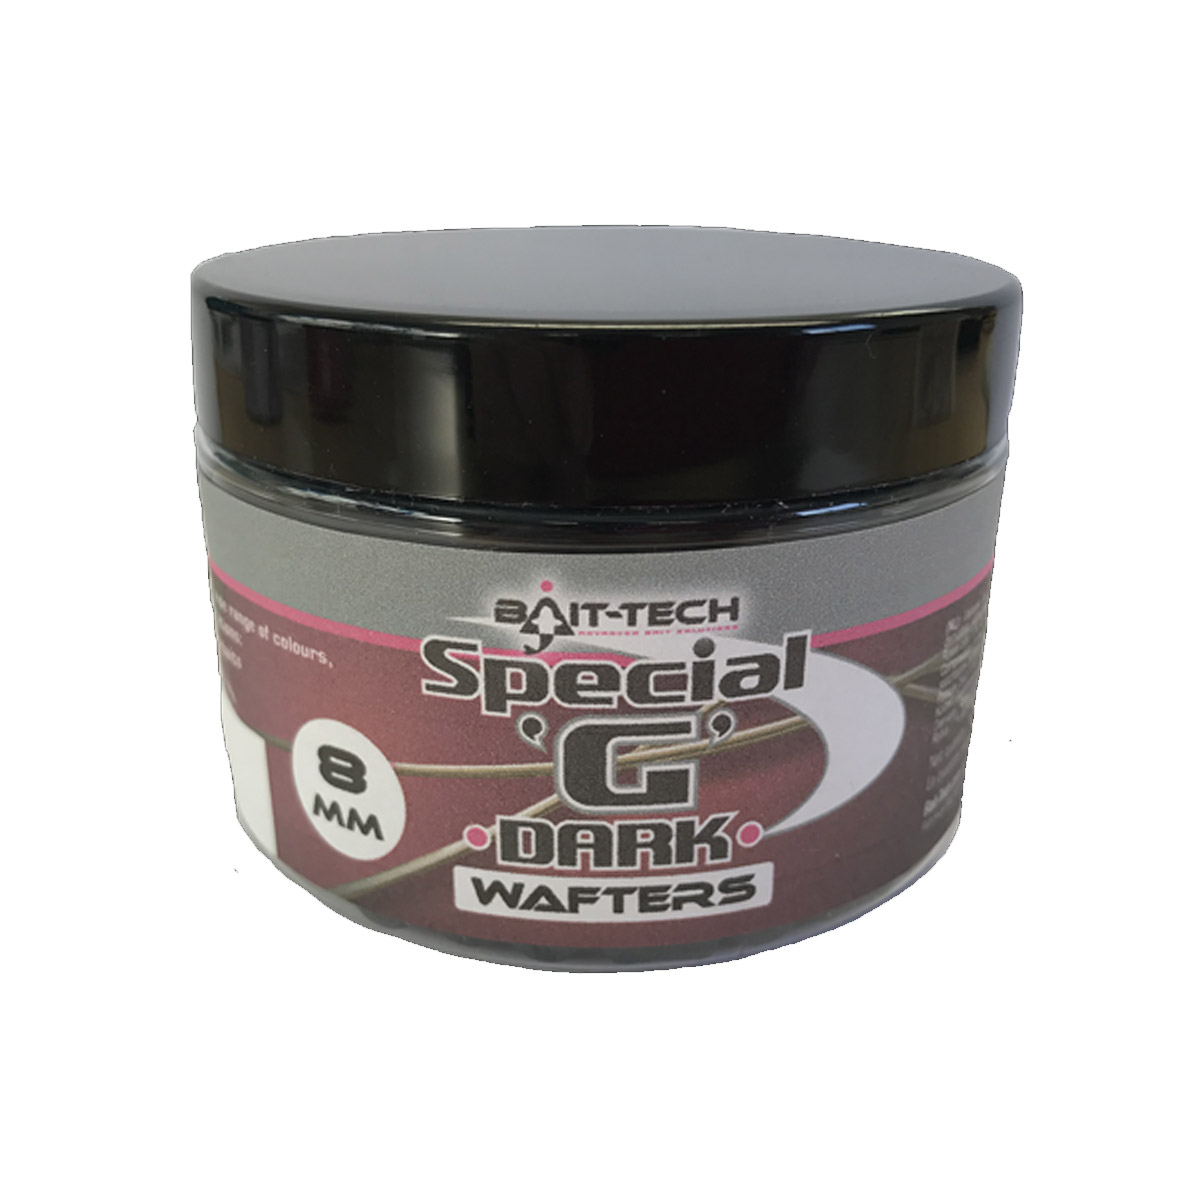 Bait-Tech Wafters Special G Dark Dumbells 8 MM